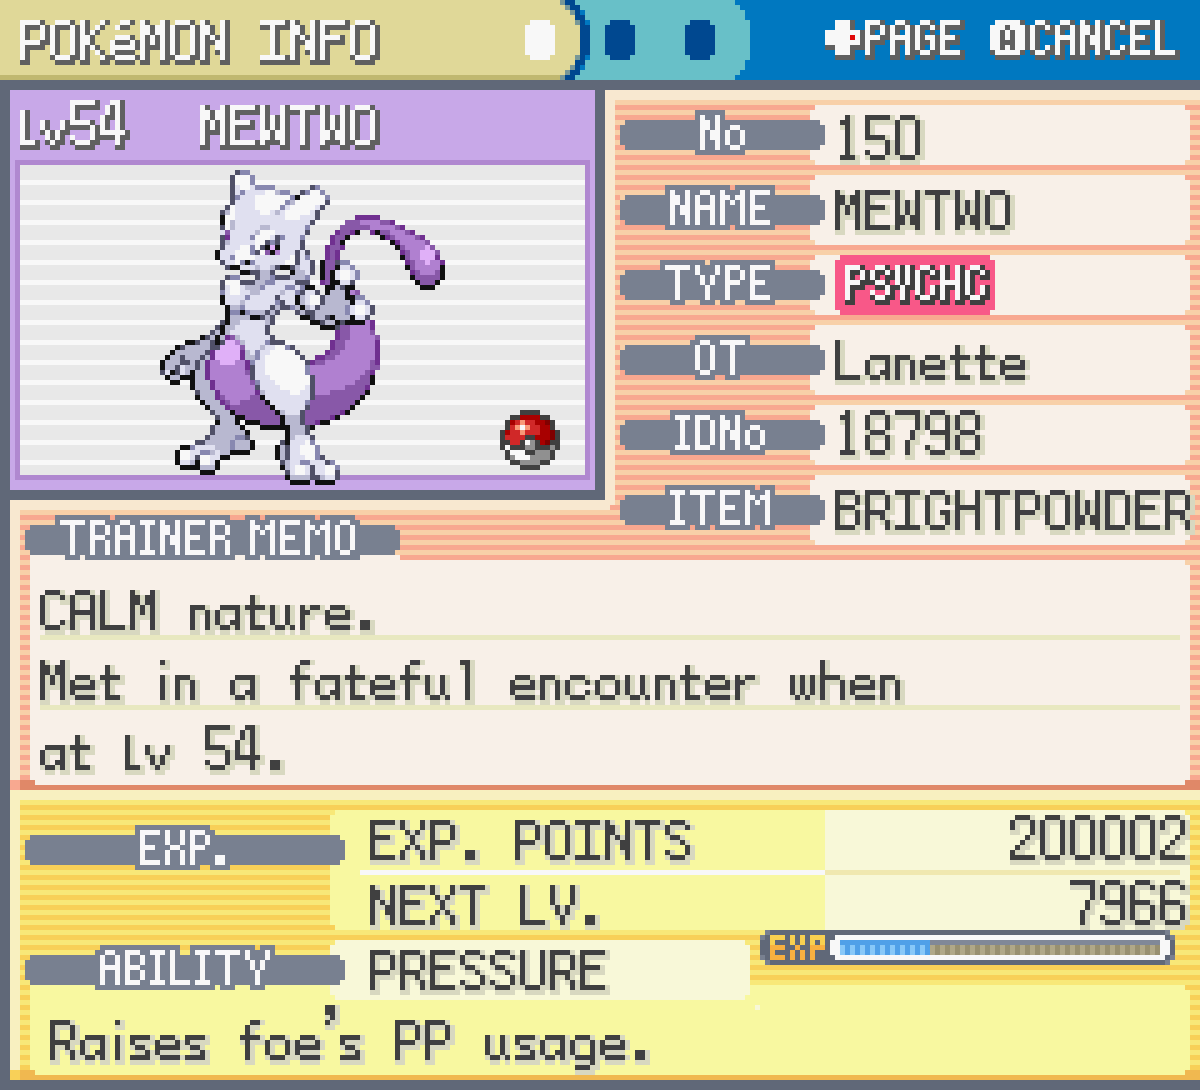 Mewtwo's stats, part 1